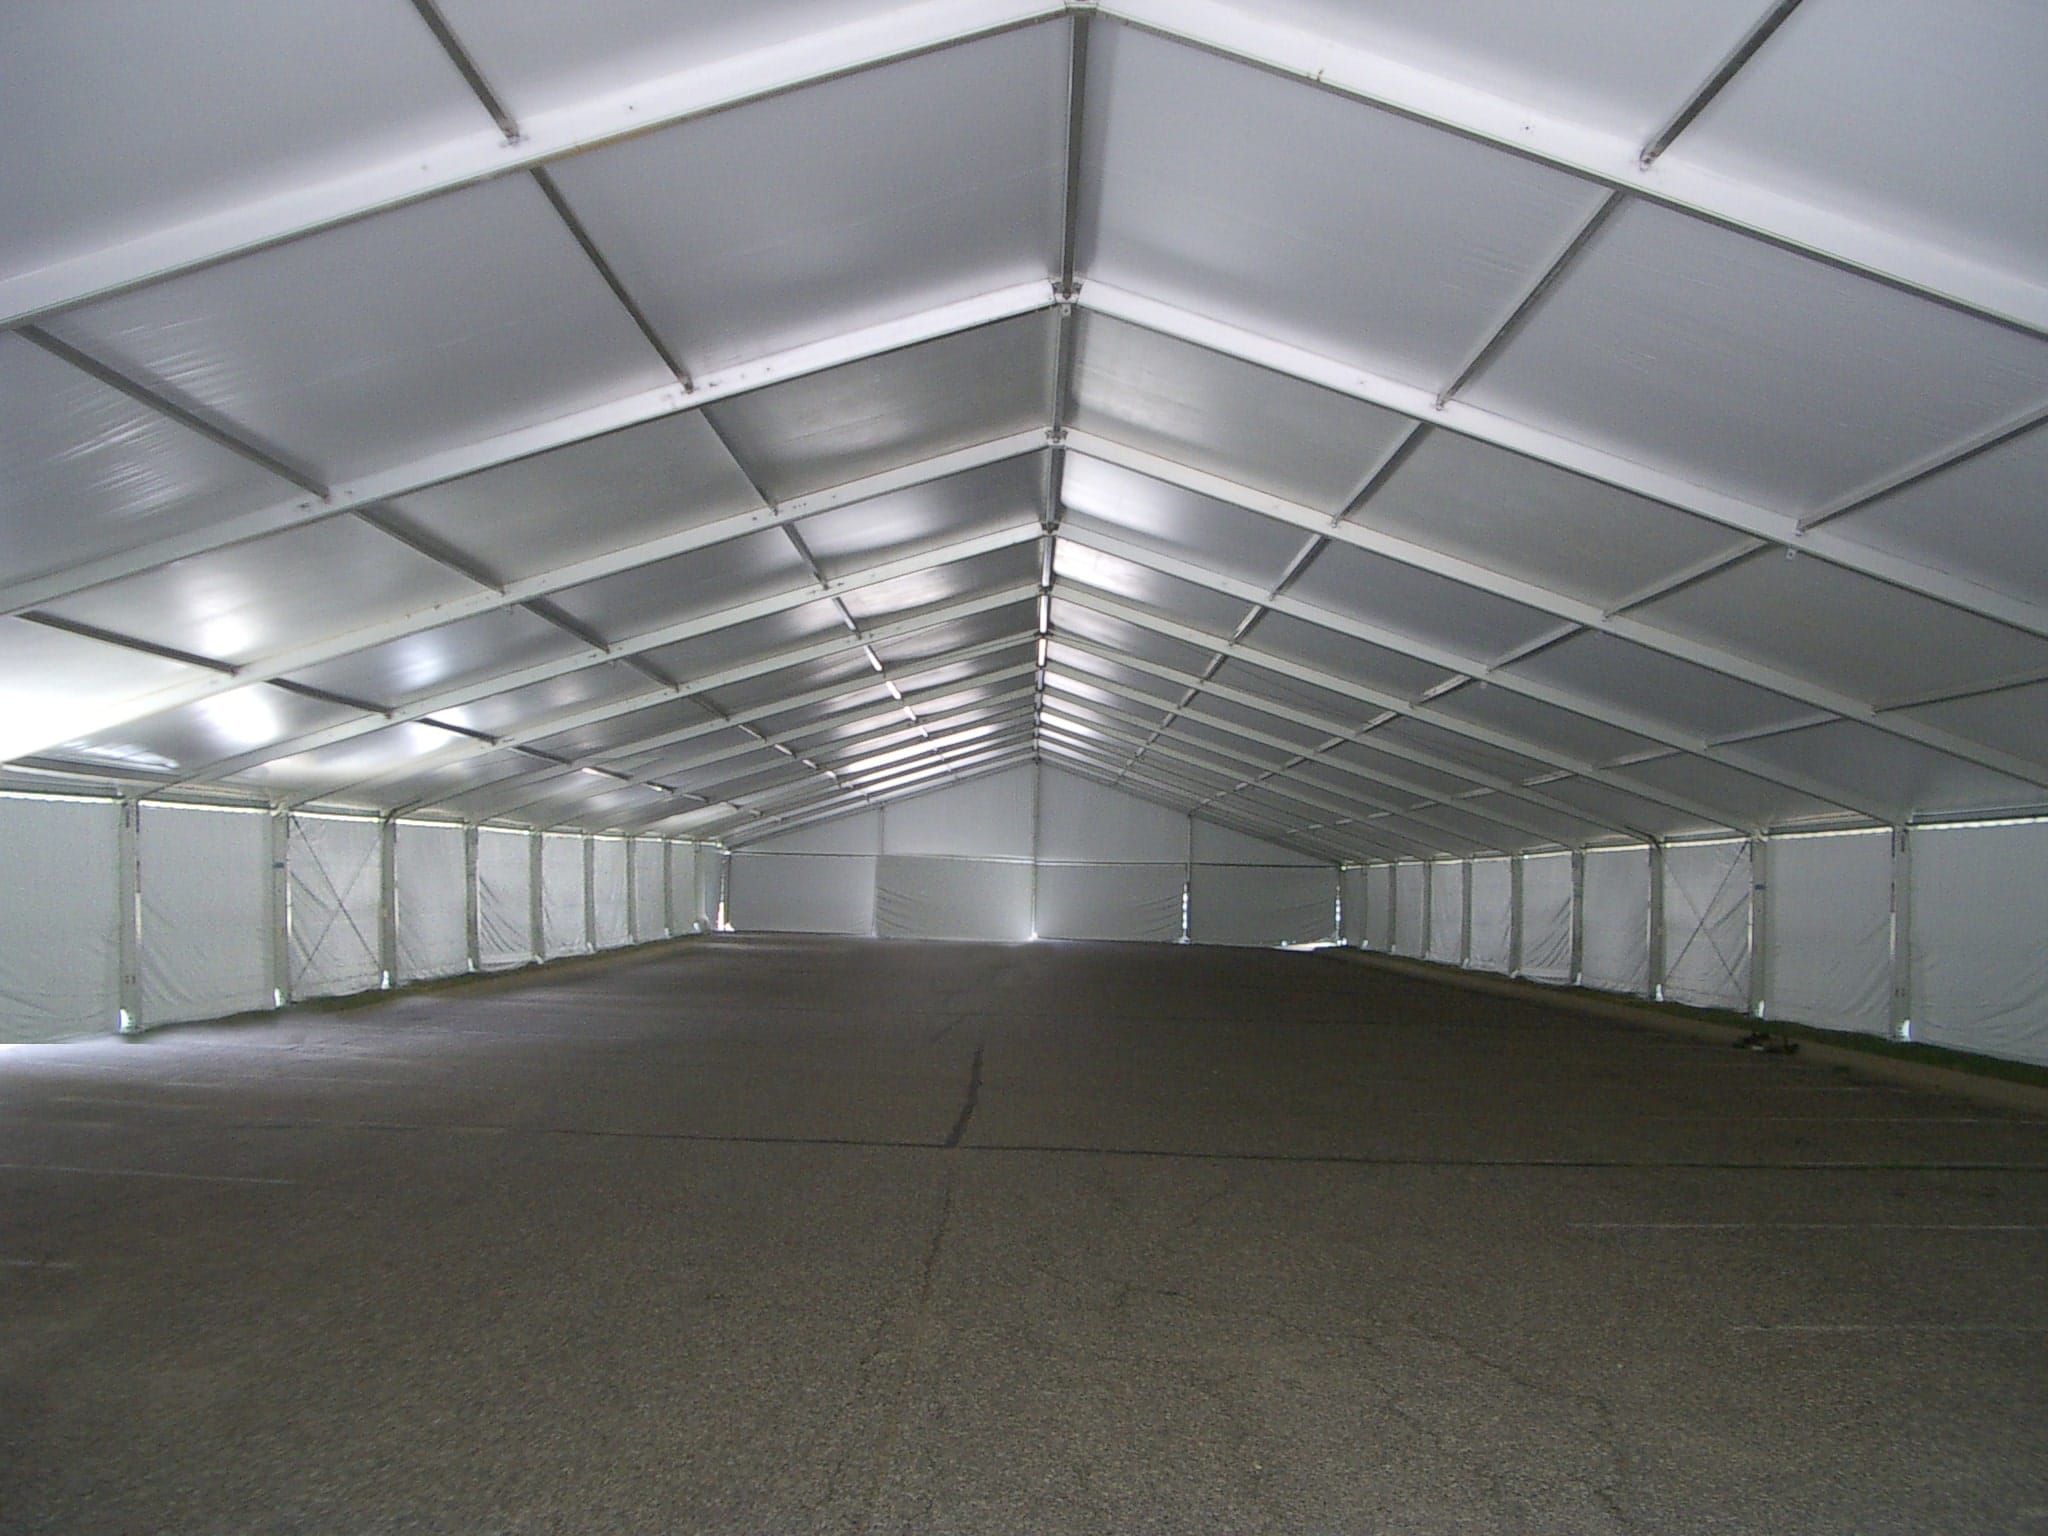 Inside of Clear Span Portable Tents | American Pavilion